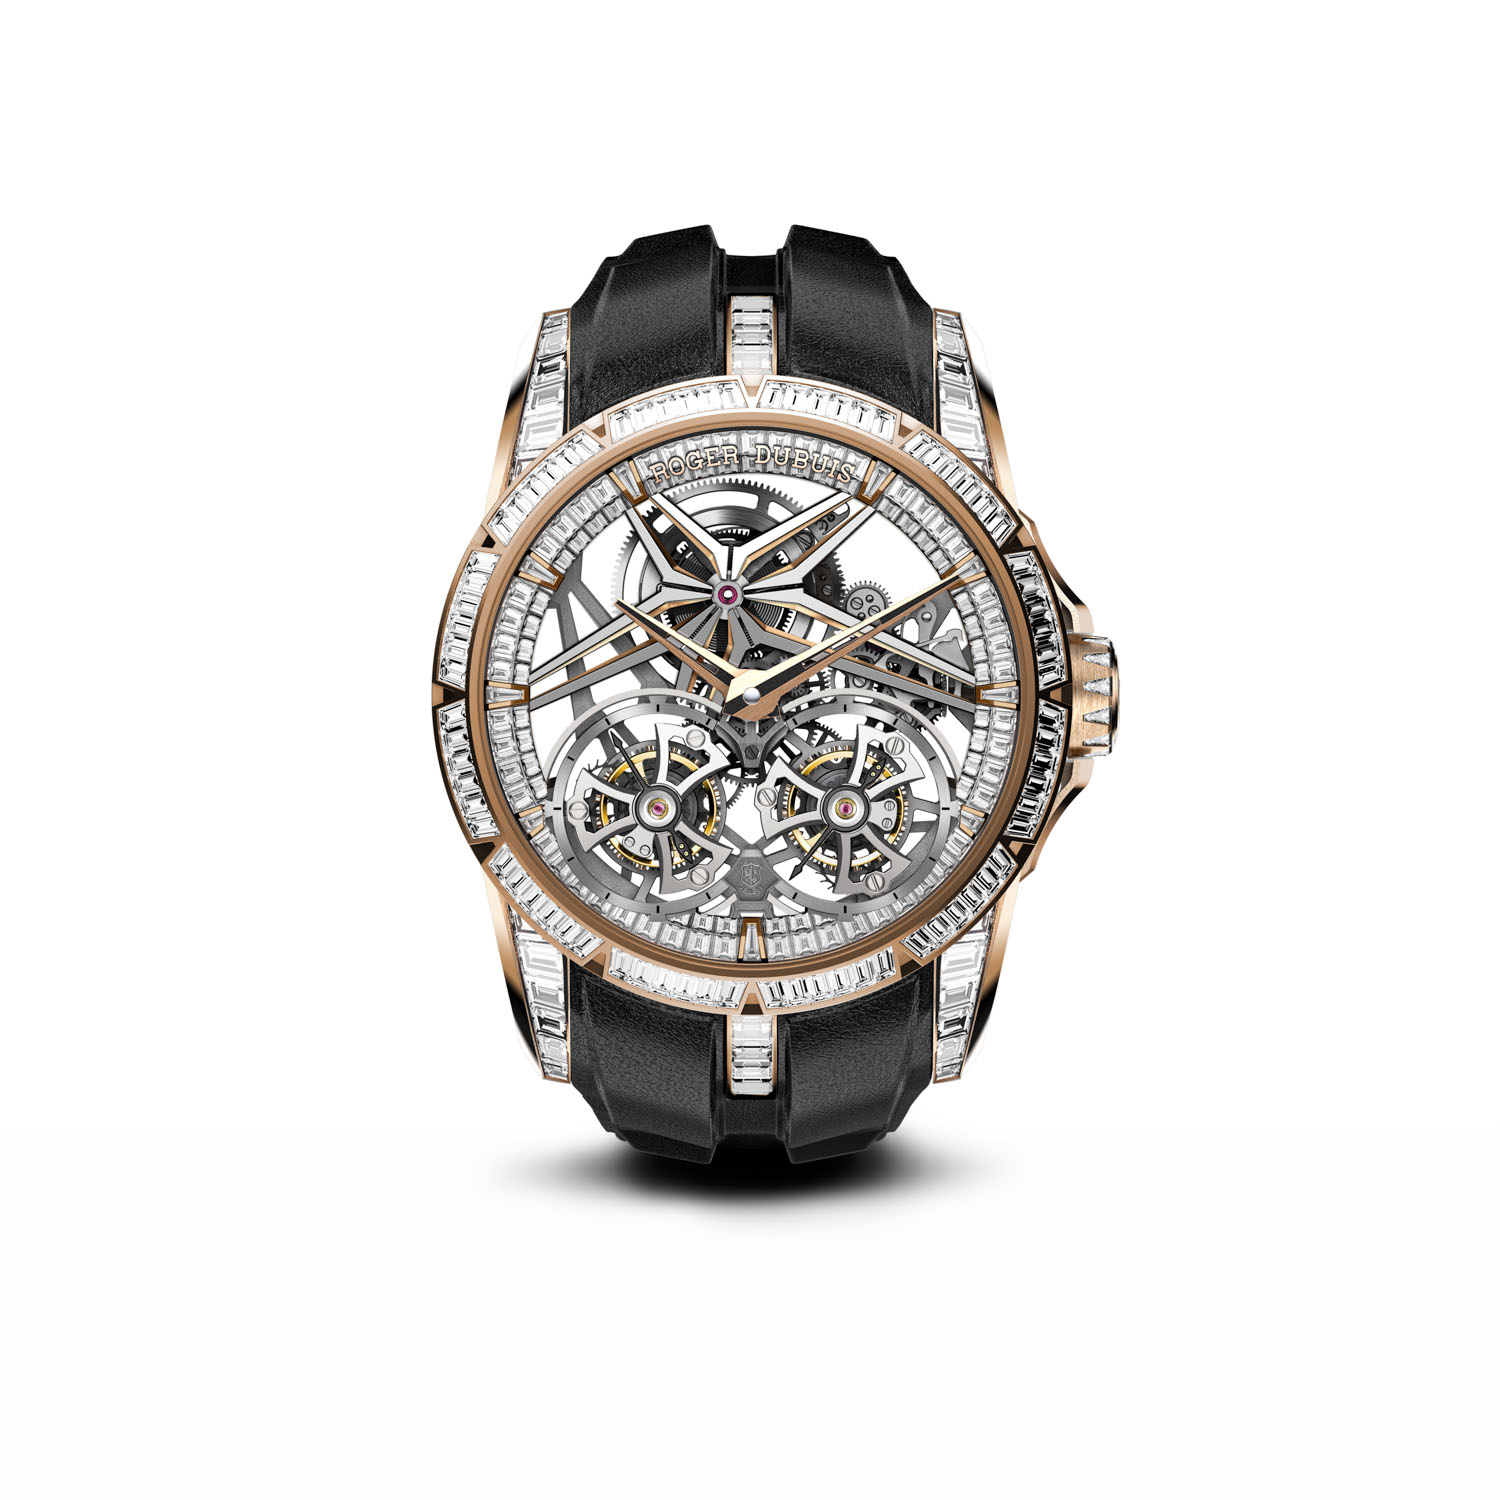 The 2021 Excalibur Double Flying Tourbillon starts off with the ref. RDDBEX0822 in a 45mm pink gold case with its bezel and crown set with baguette diamonds (Limited edition of 8 pieces)